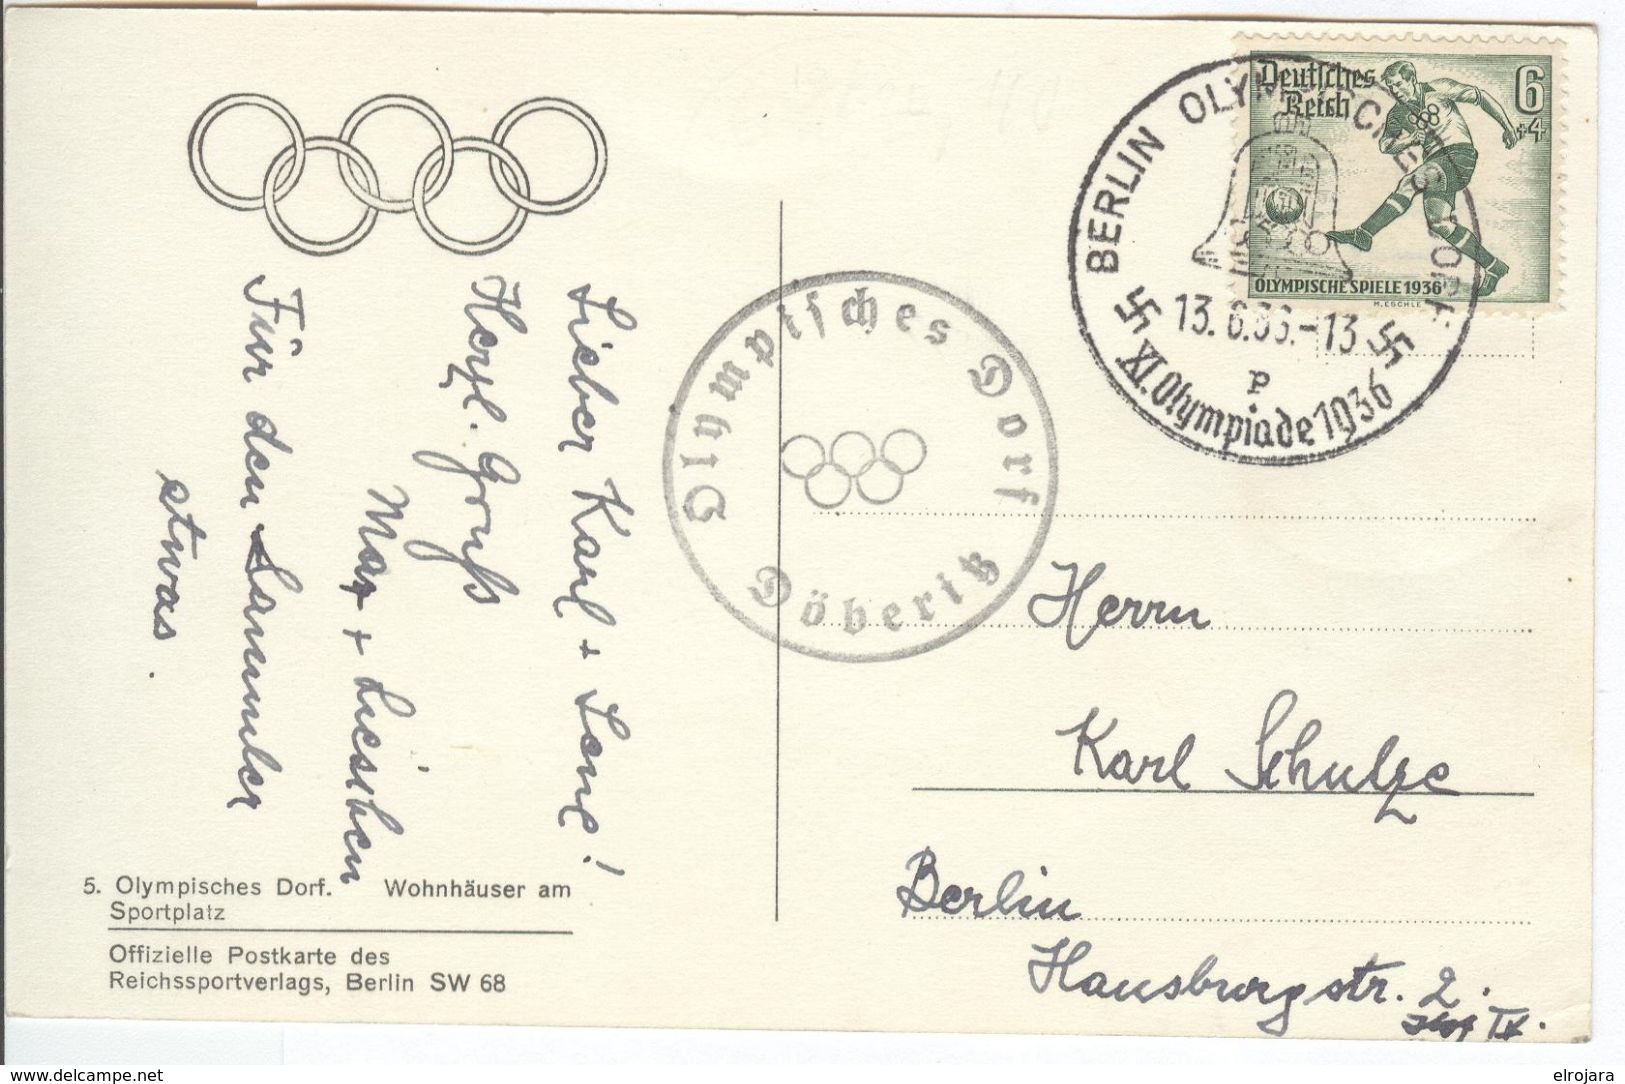 GERMANY Used Olympic Postcard Nr. 5 With The Olympic Village - Ete 1936: Berlin